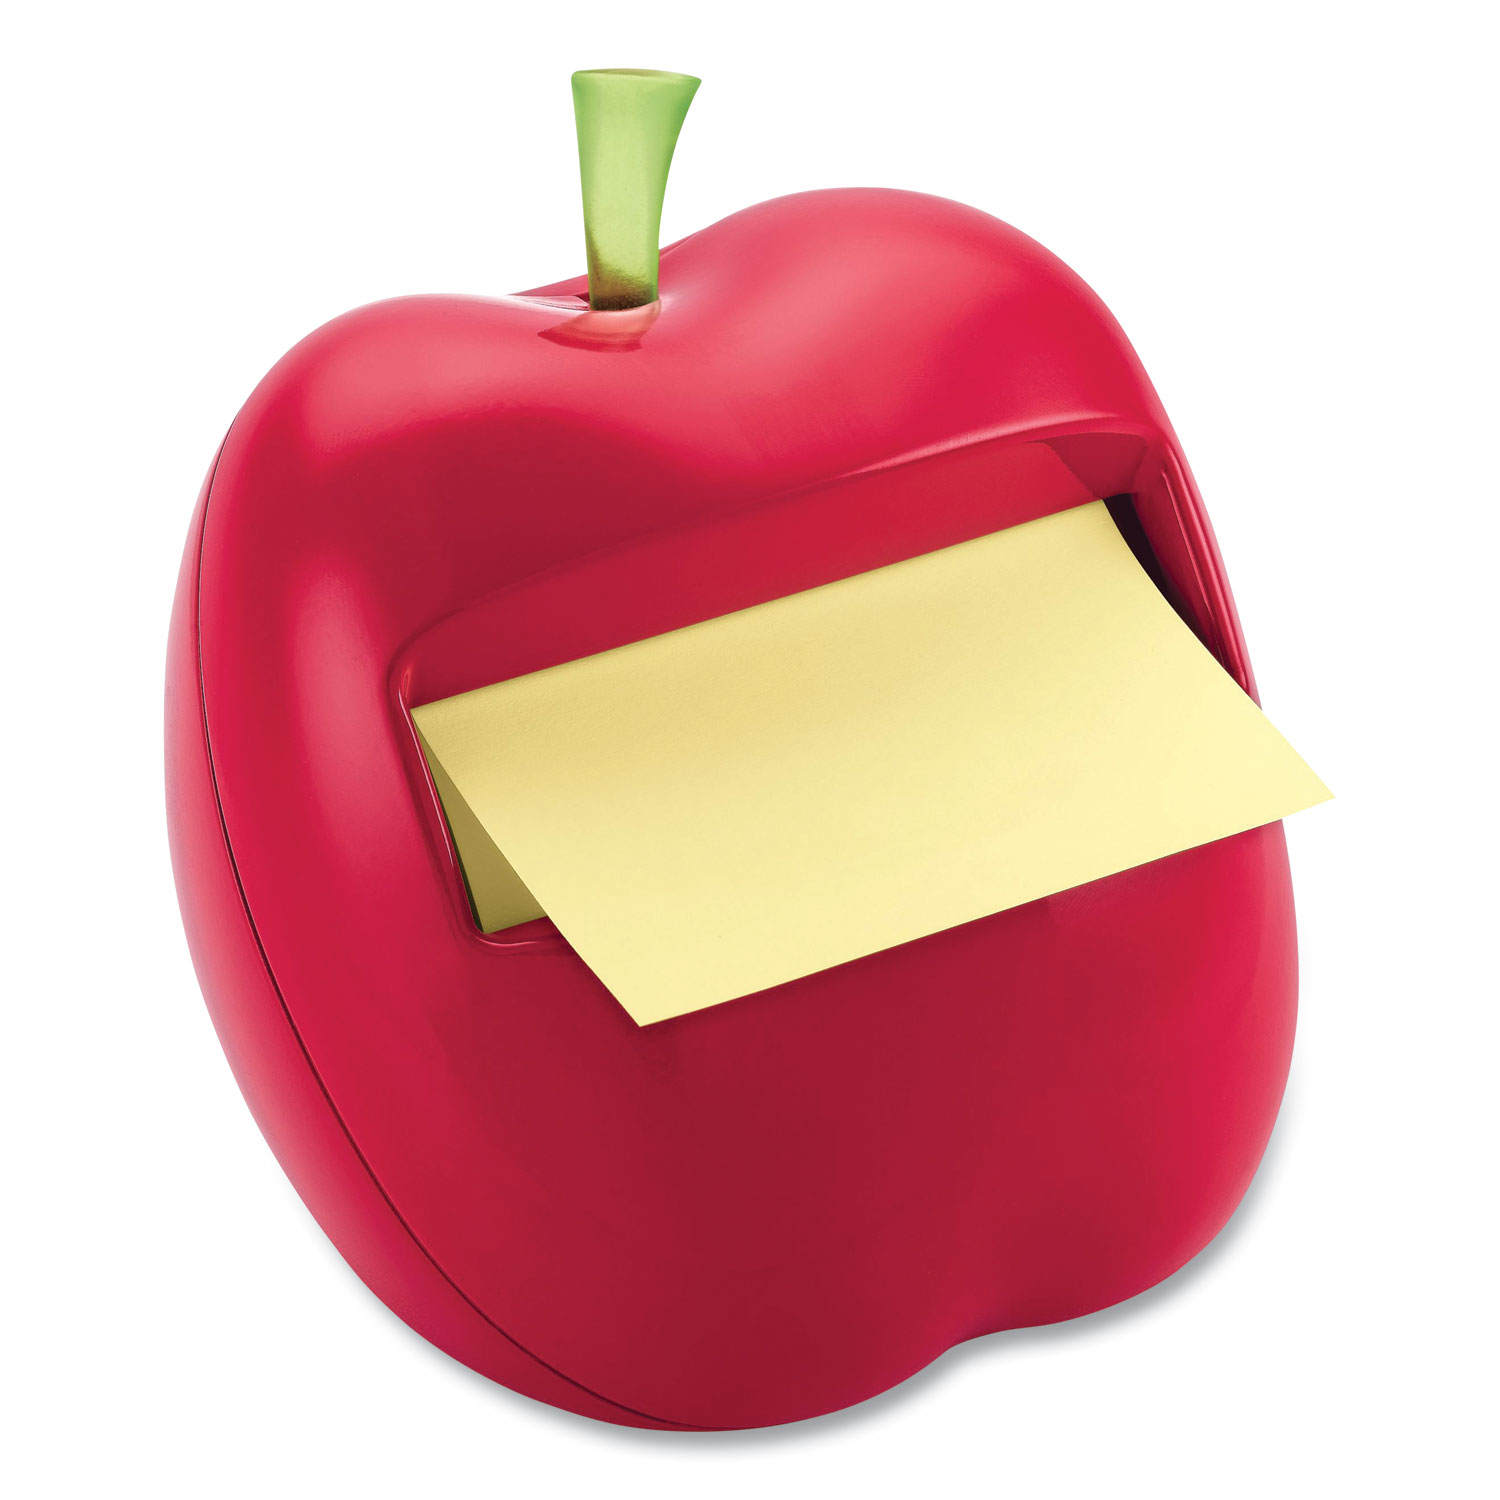  Post-it Pop-up Notes APL330 Apple-Shaped Dispenser for 3 x 3 Self-Stick Pads, Red (MMM922552) 